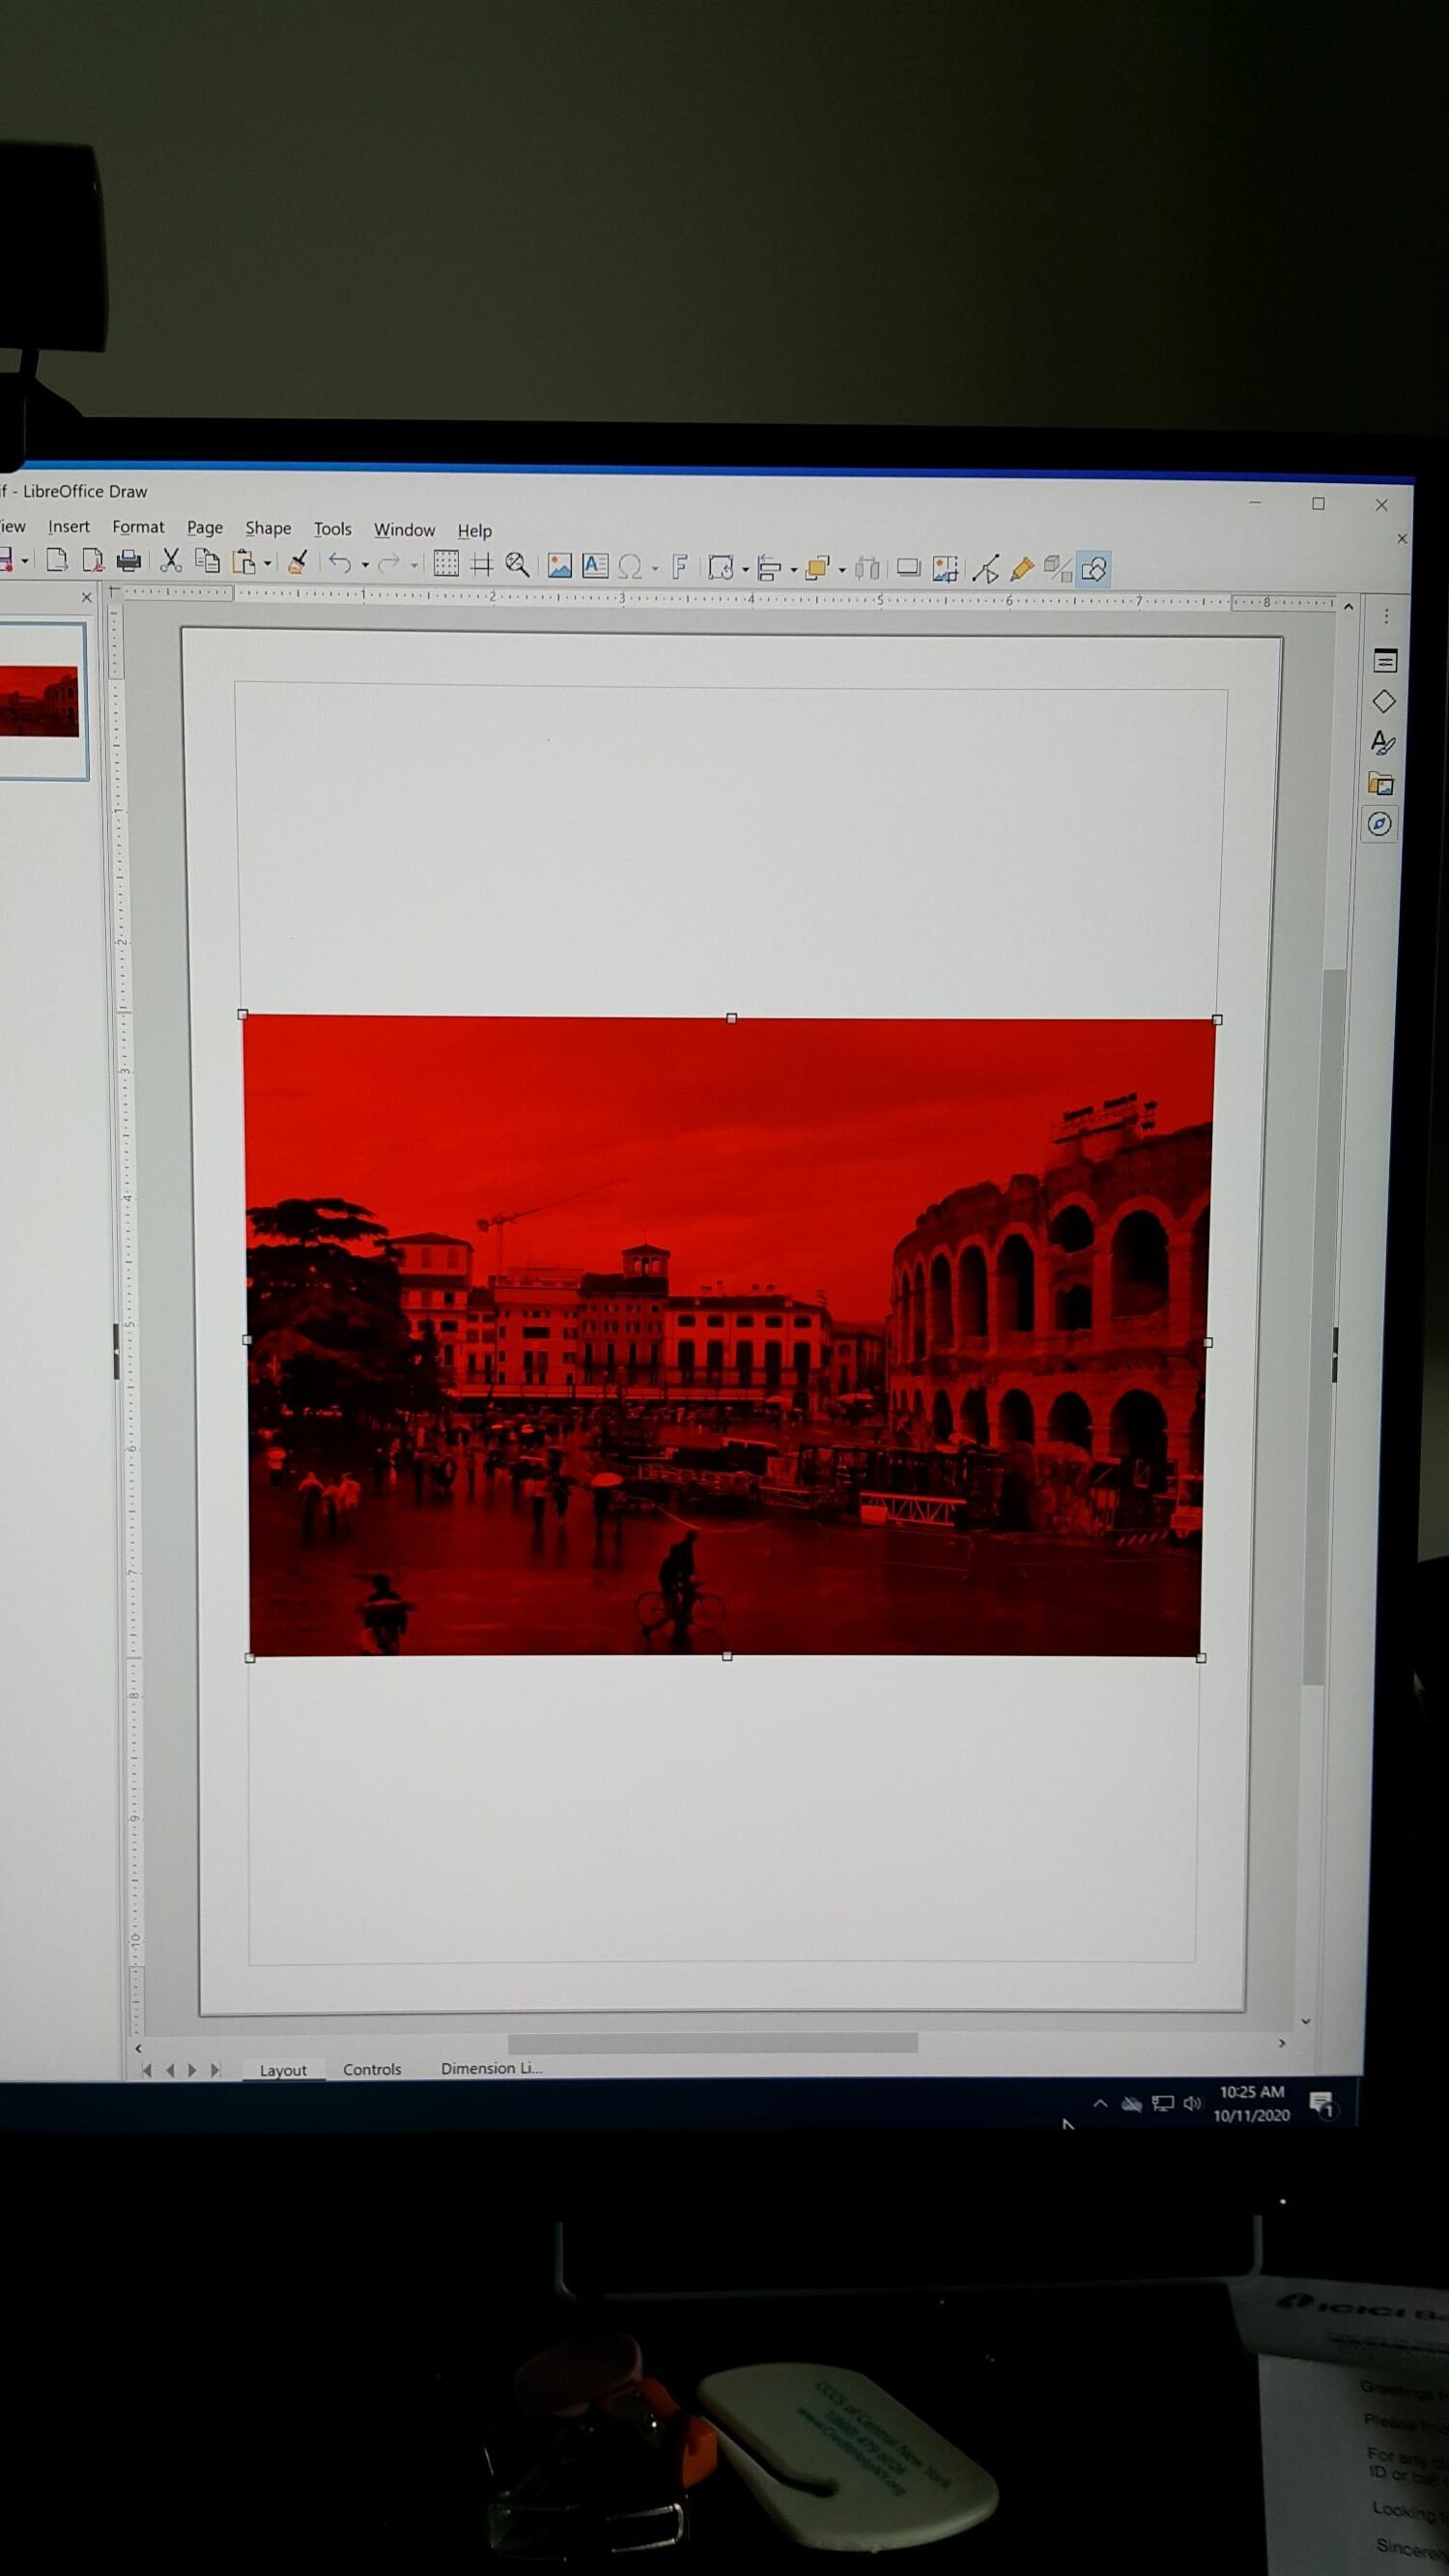 In write inserted image got a red color cast - English - Ask